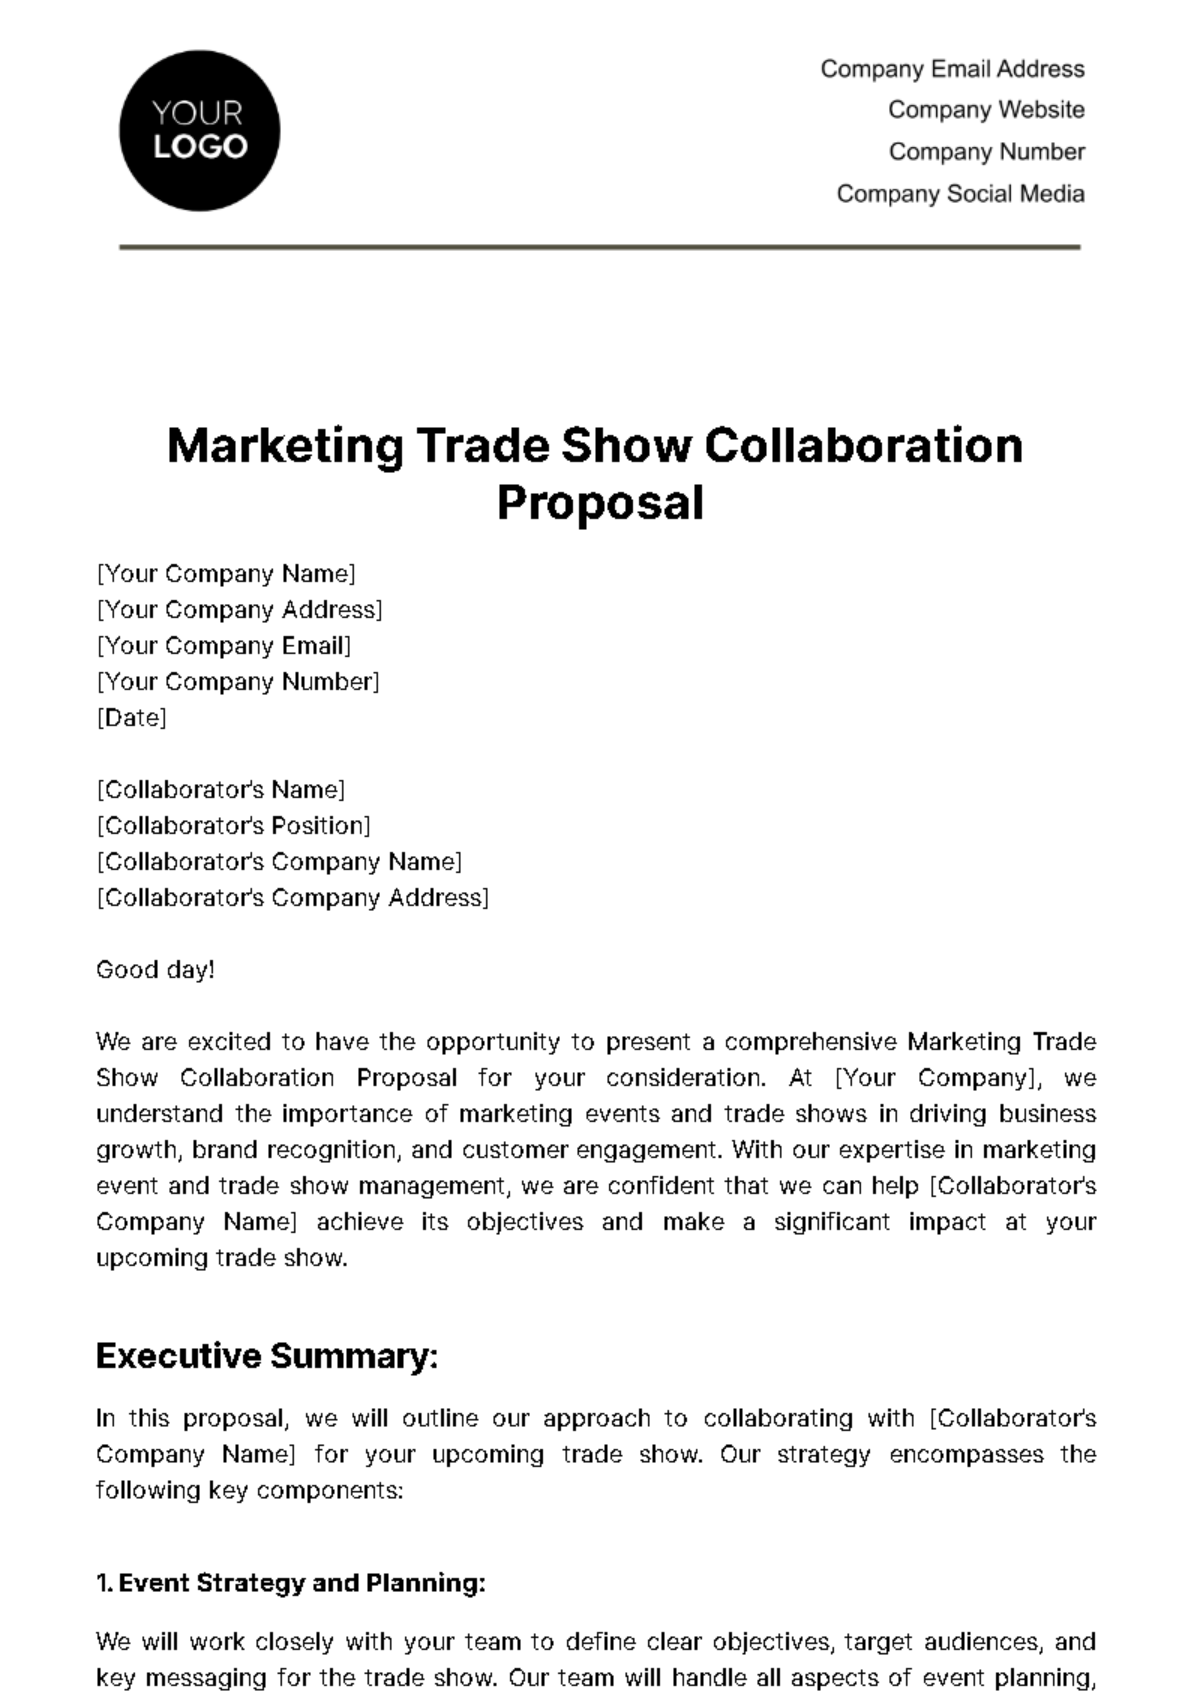 Free Marketing Trade Show Collaboration Proposal Template